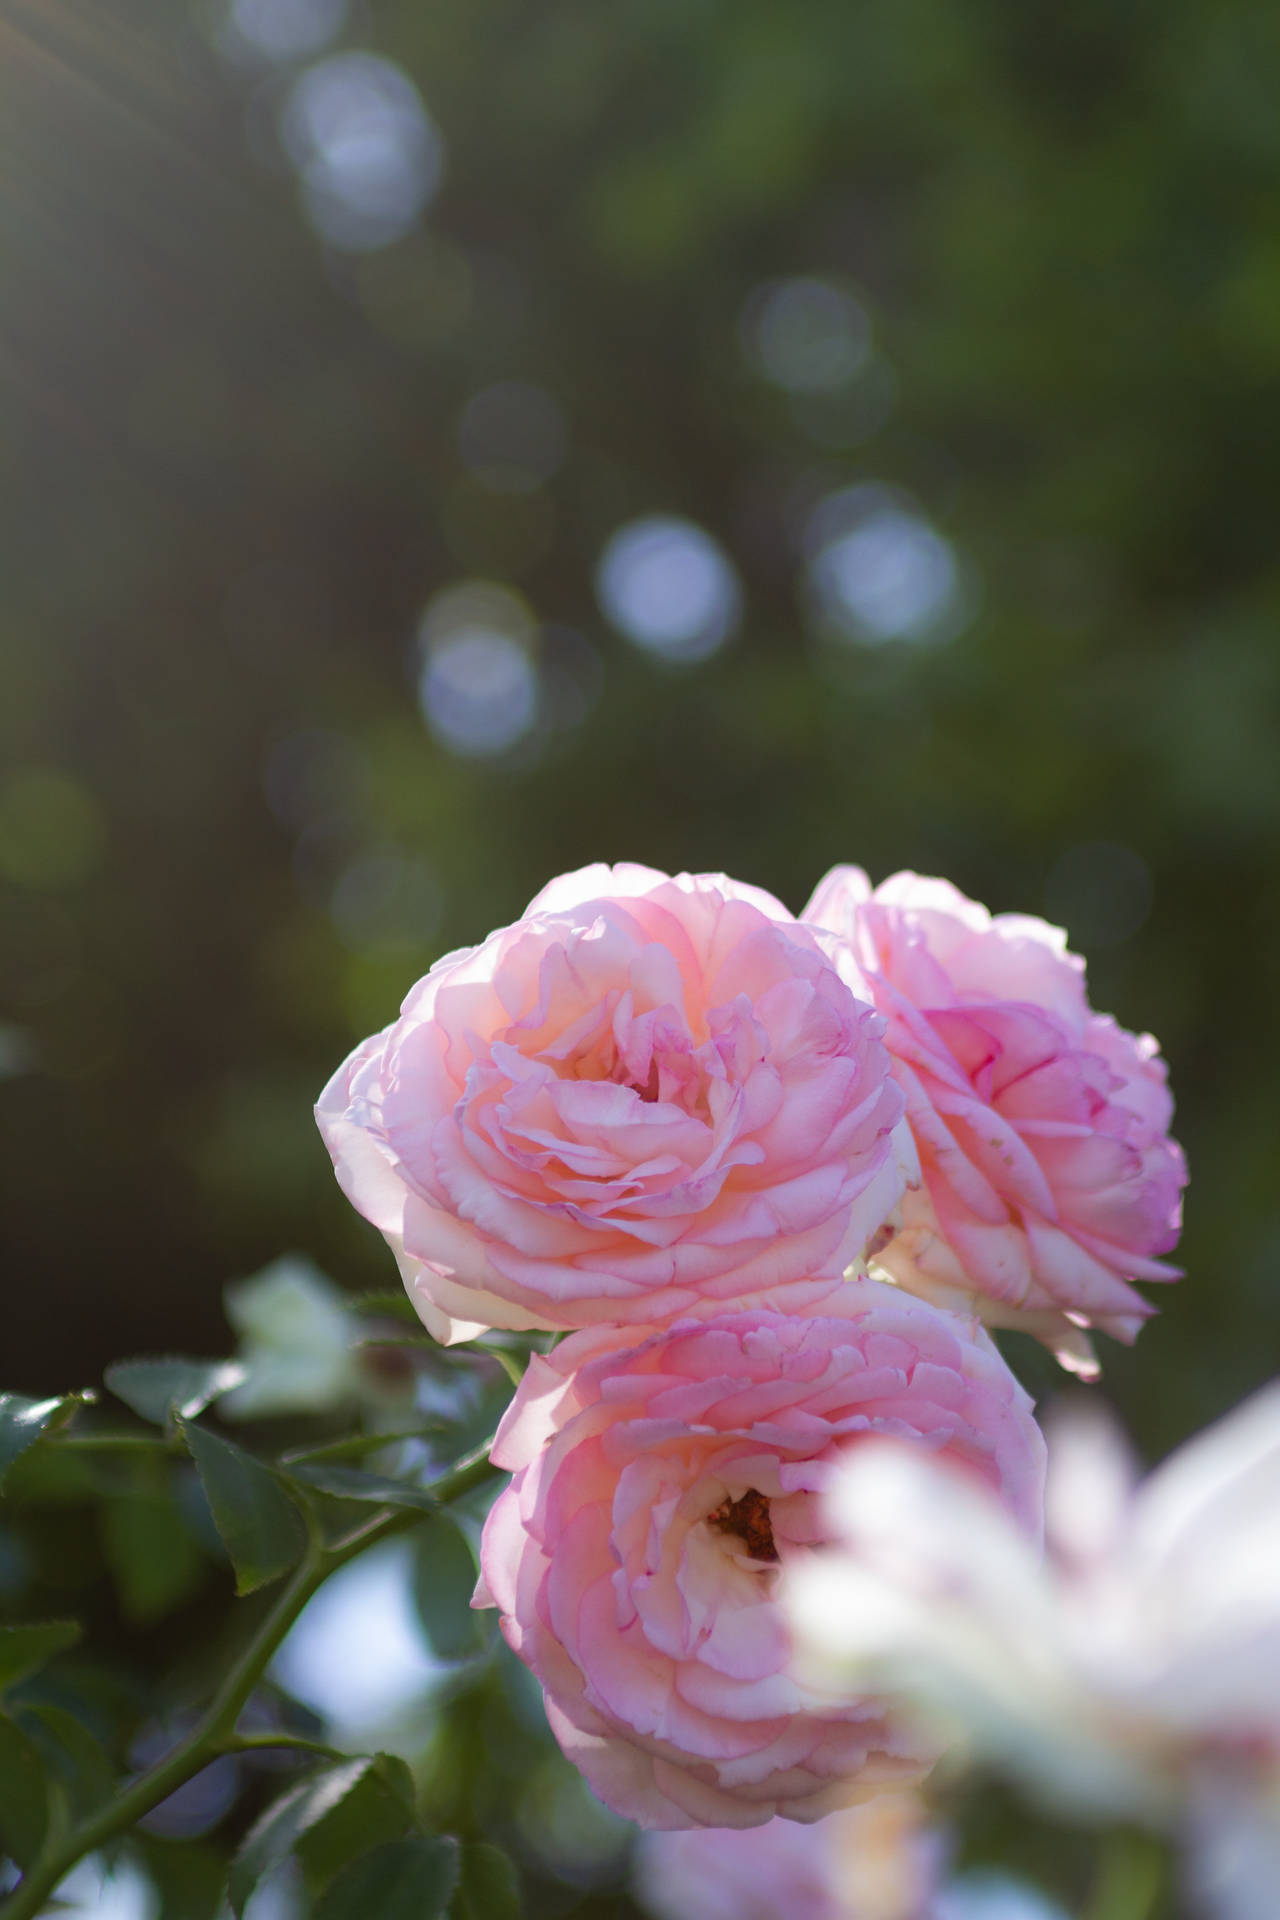 Aesthetic Rose Blooming During Daytime Background